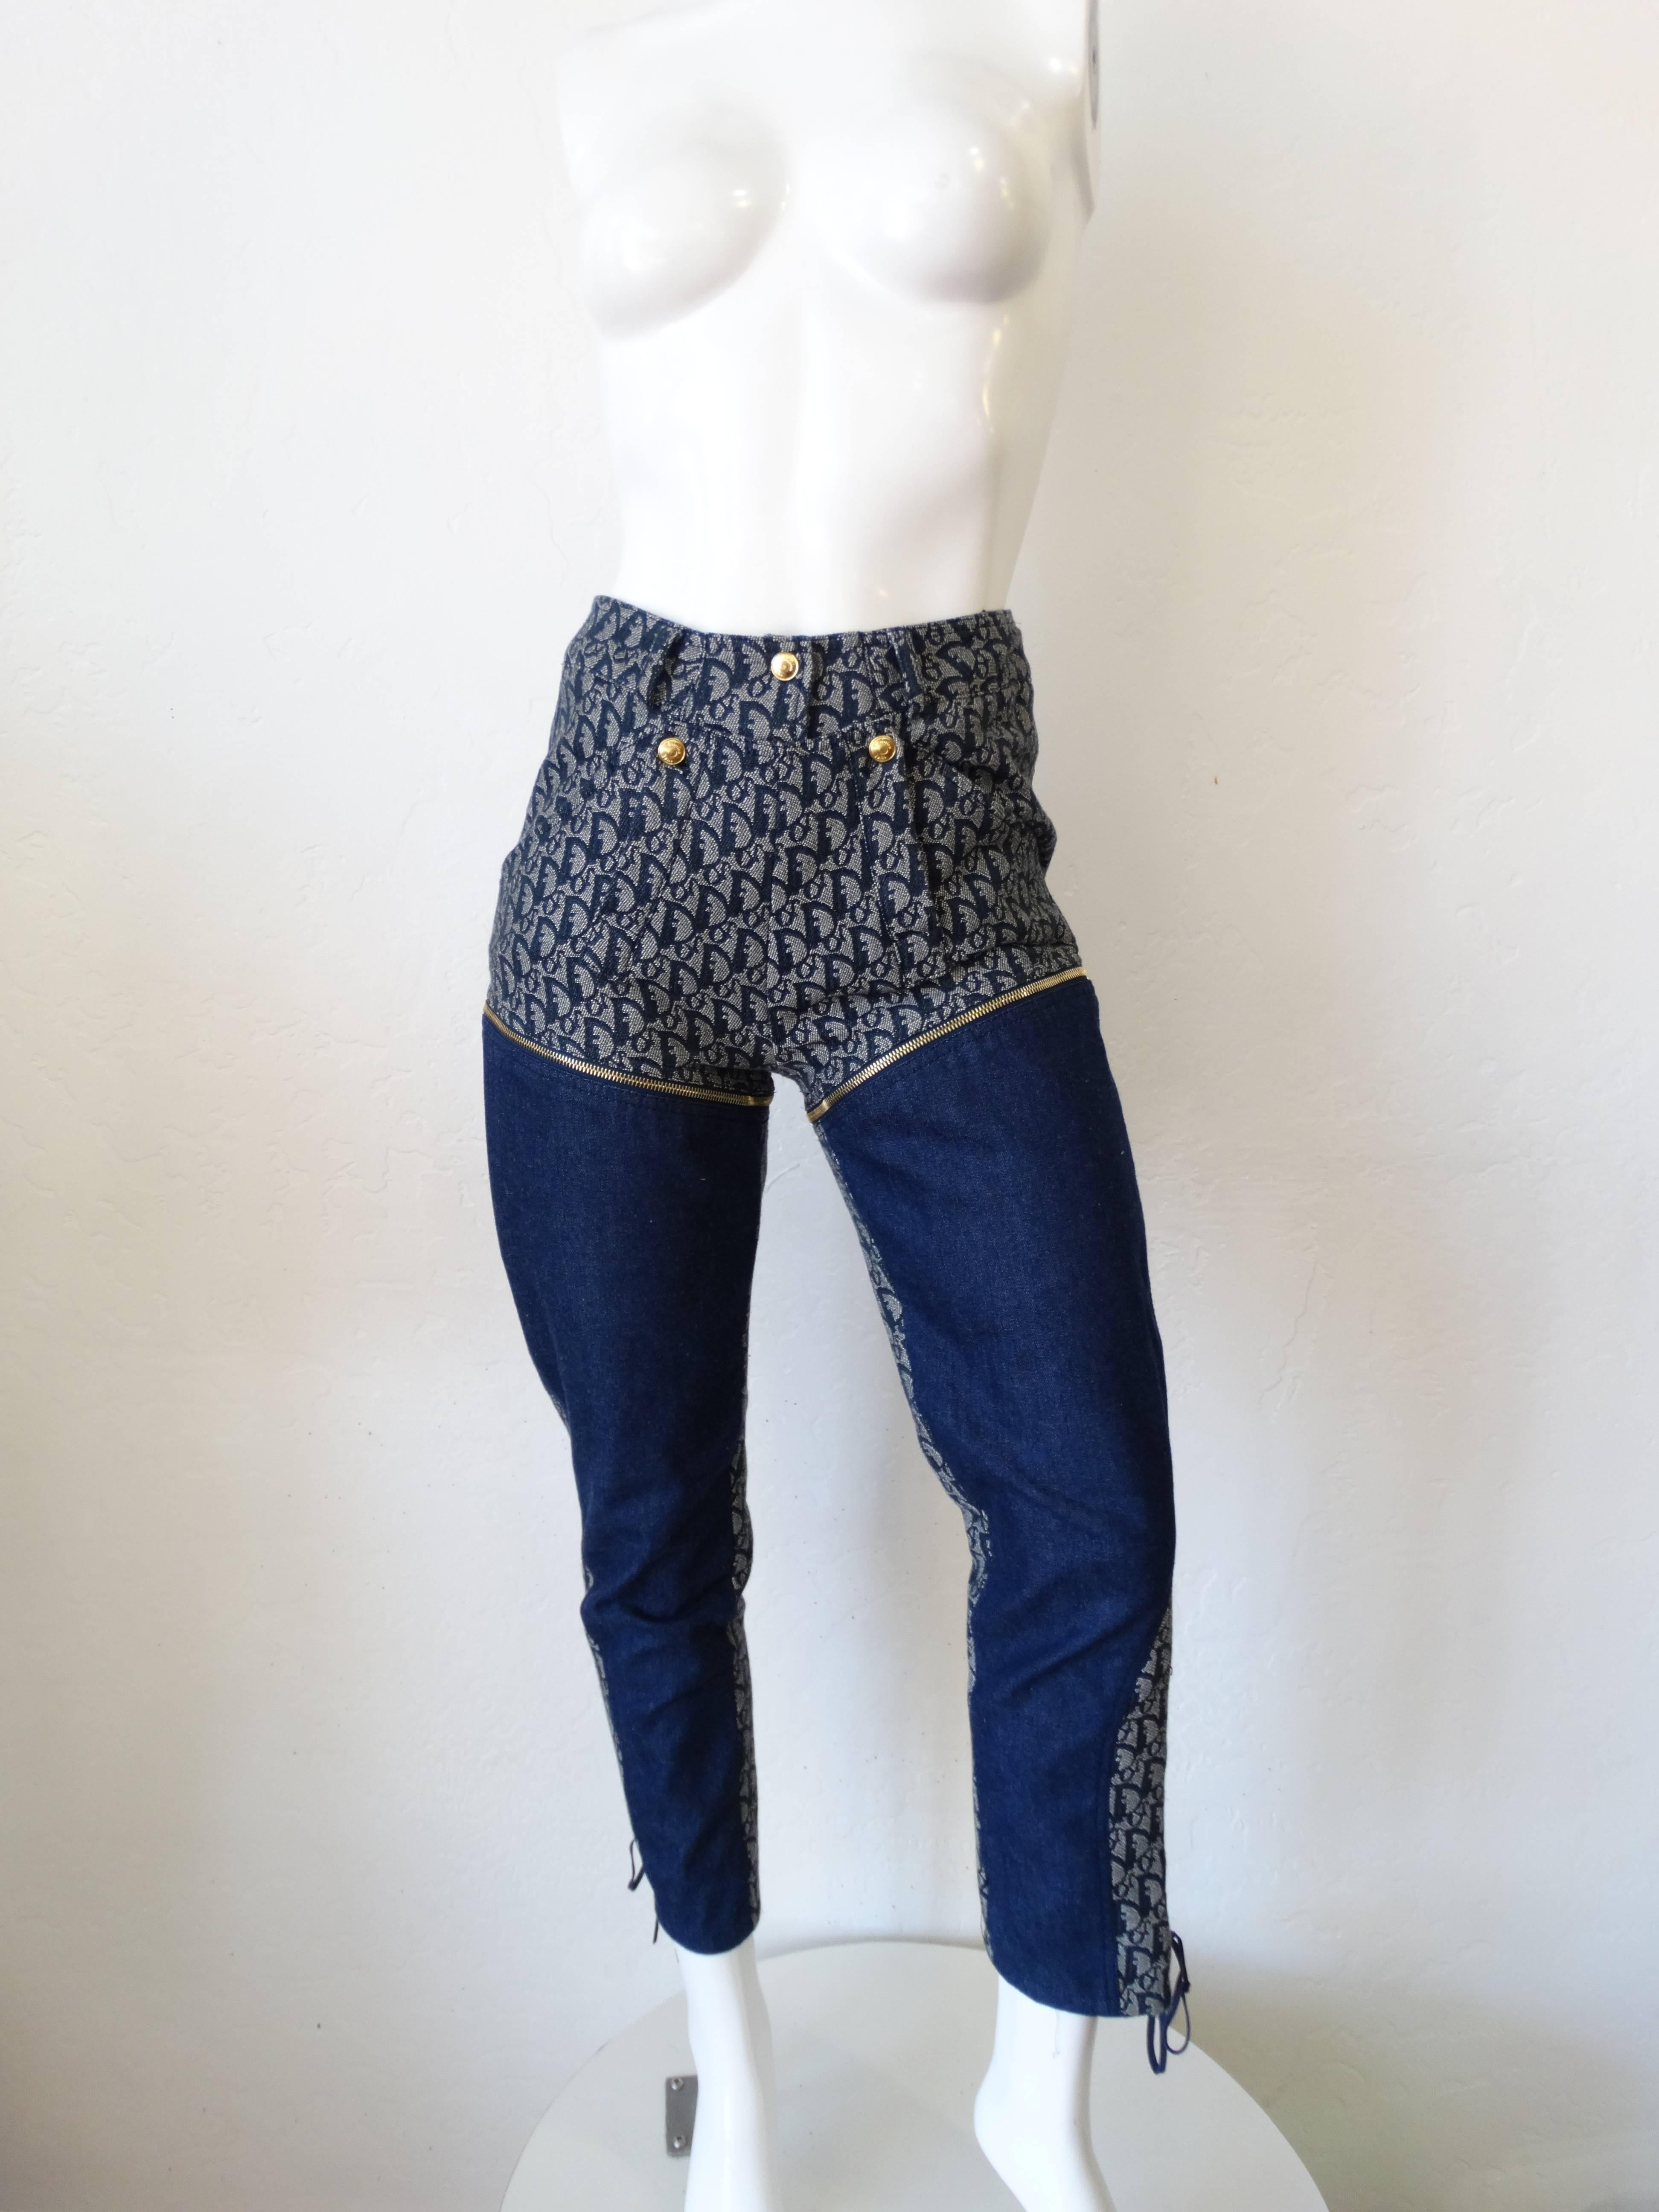 Snag yourself an amazing piece from the John Galliano Era of Christian Dior! These are no ordinary jeans- they're convertible! The pant legs zip off at either side of the thighs to reveal a pair of short-shorts! Classic Dior Monogram print in a true